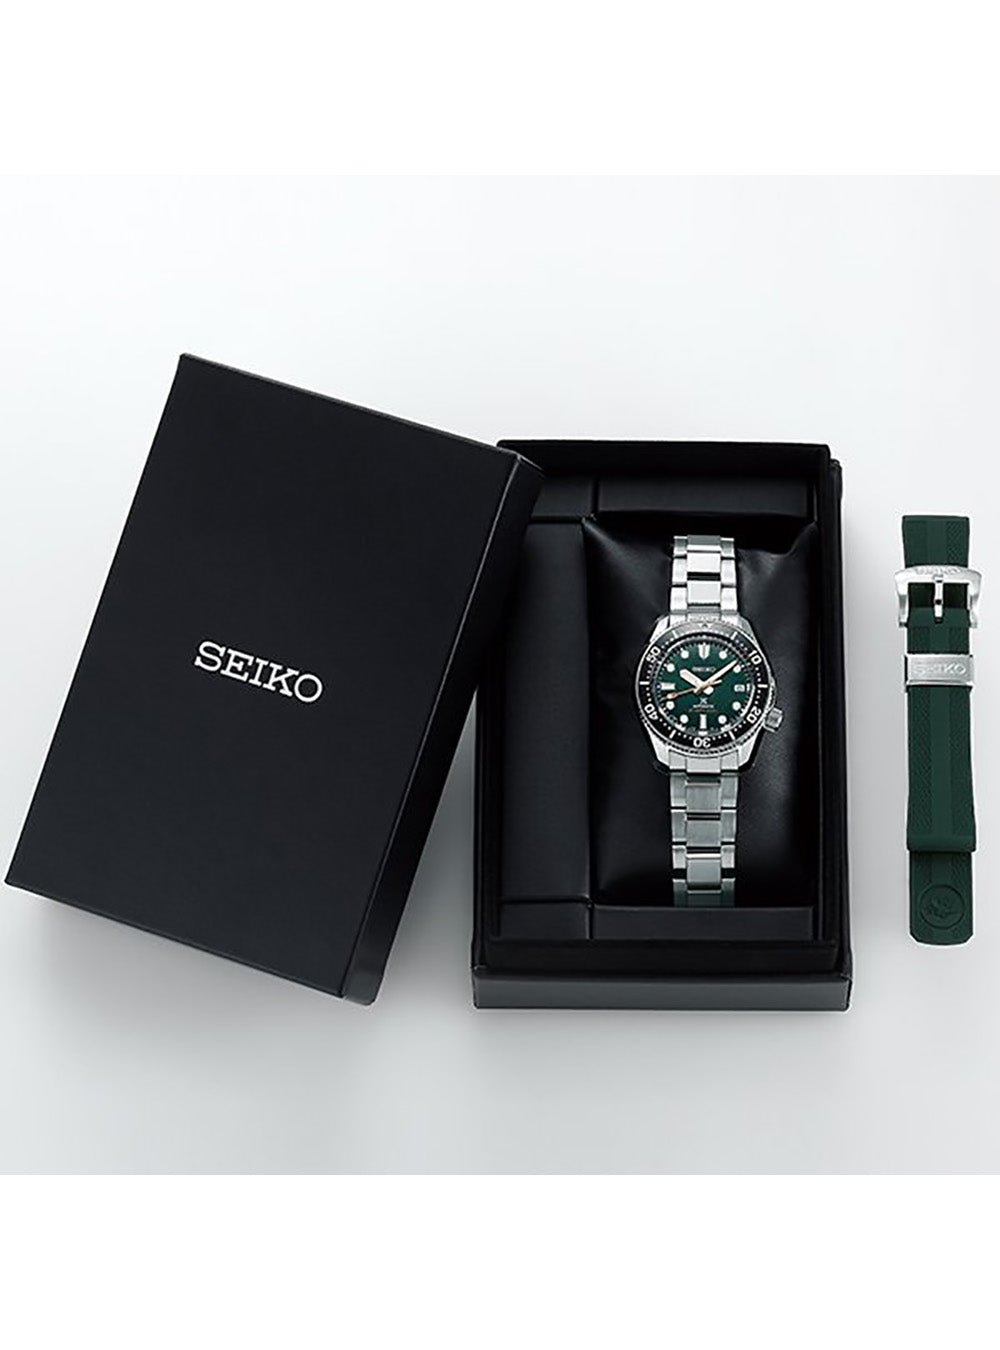 SEIKO WATCH PROSPEX DIVER SCUBA 140TH ANNIVERSARY SBDC133 LIMITED EDITION MADE IN JAPAN JDMWRISTWATCHjapan-select